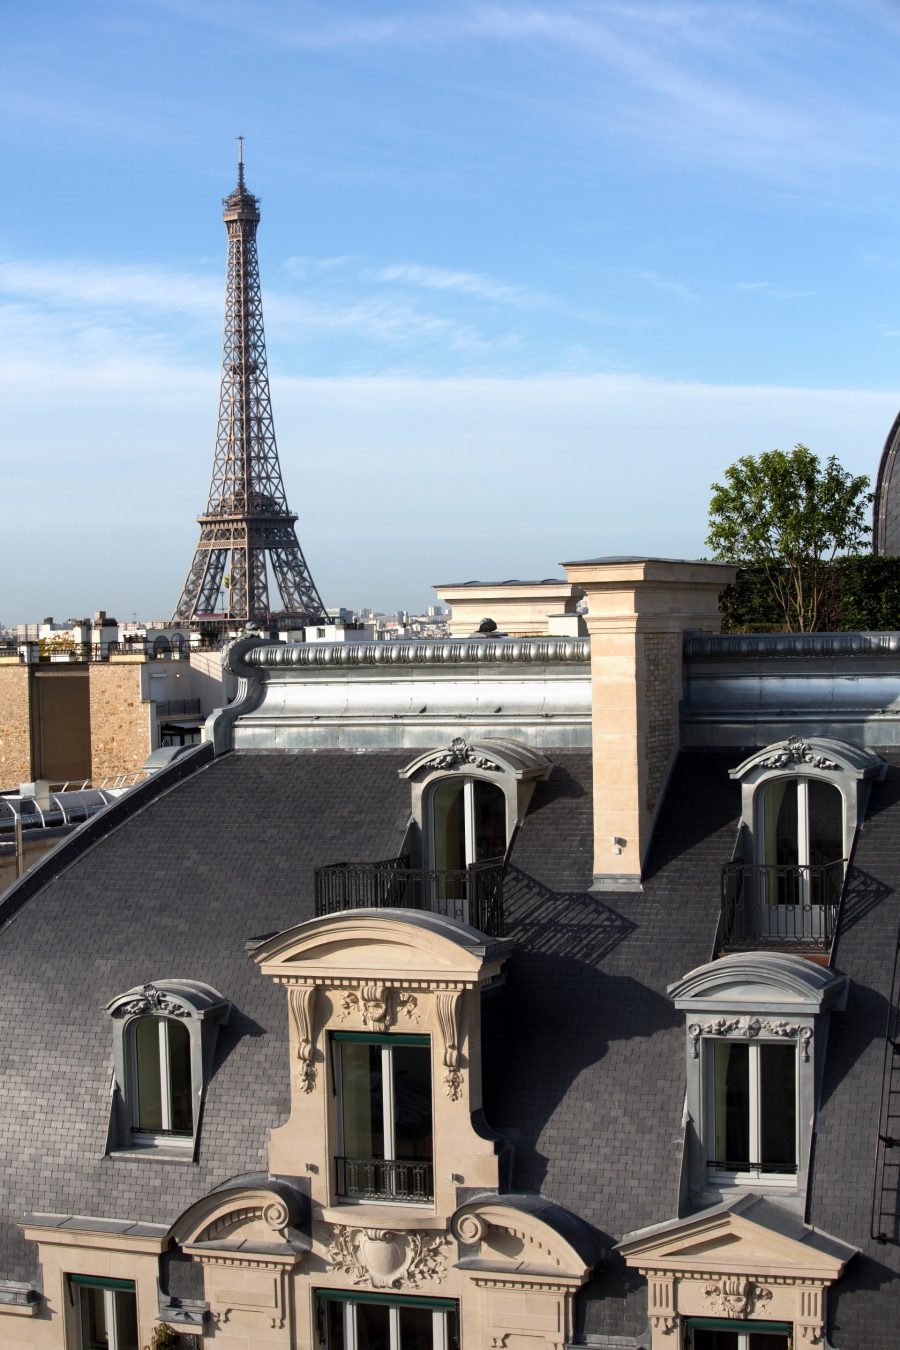 See Need Want Travel The Peninsula Paris Hotel Eiffel Tower View